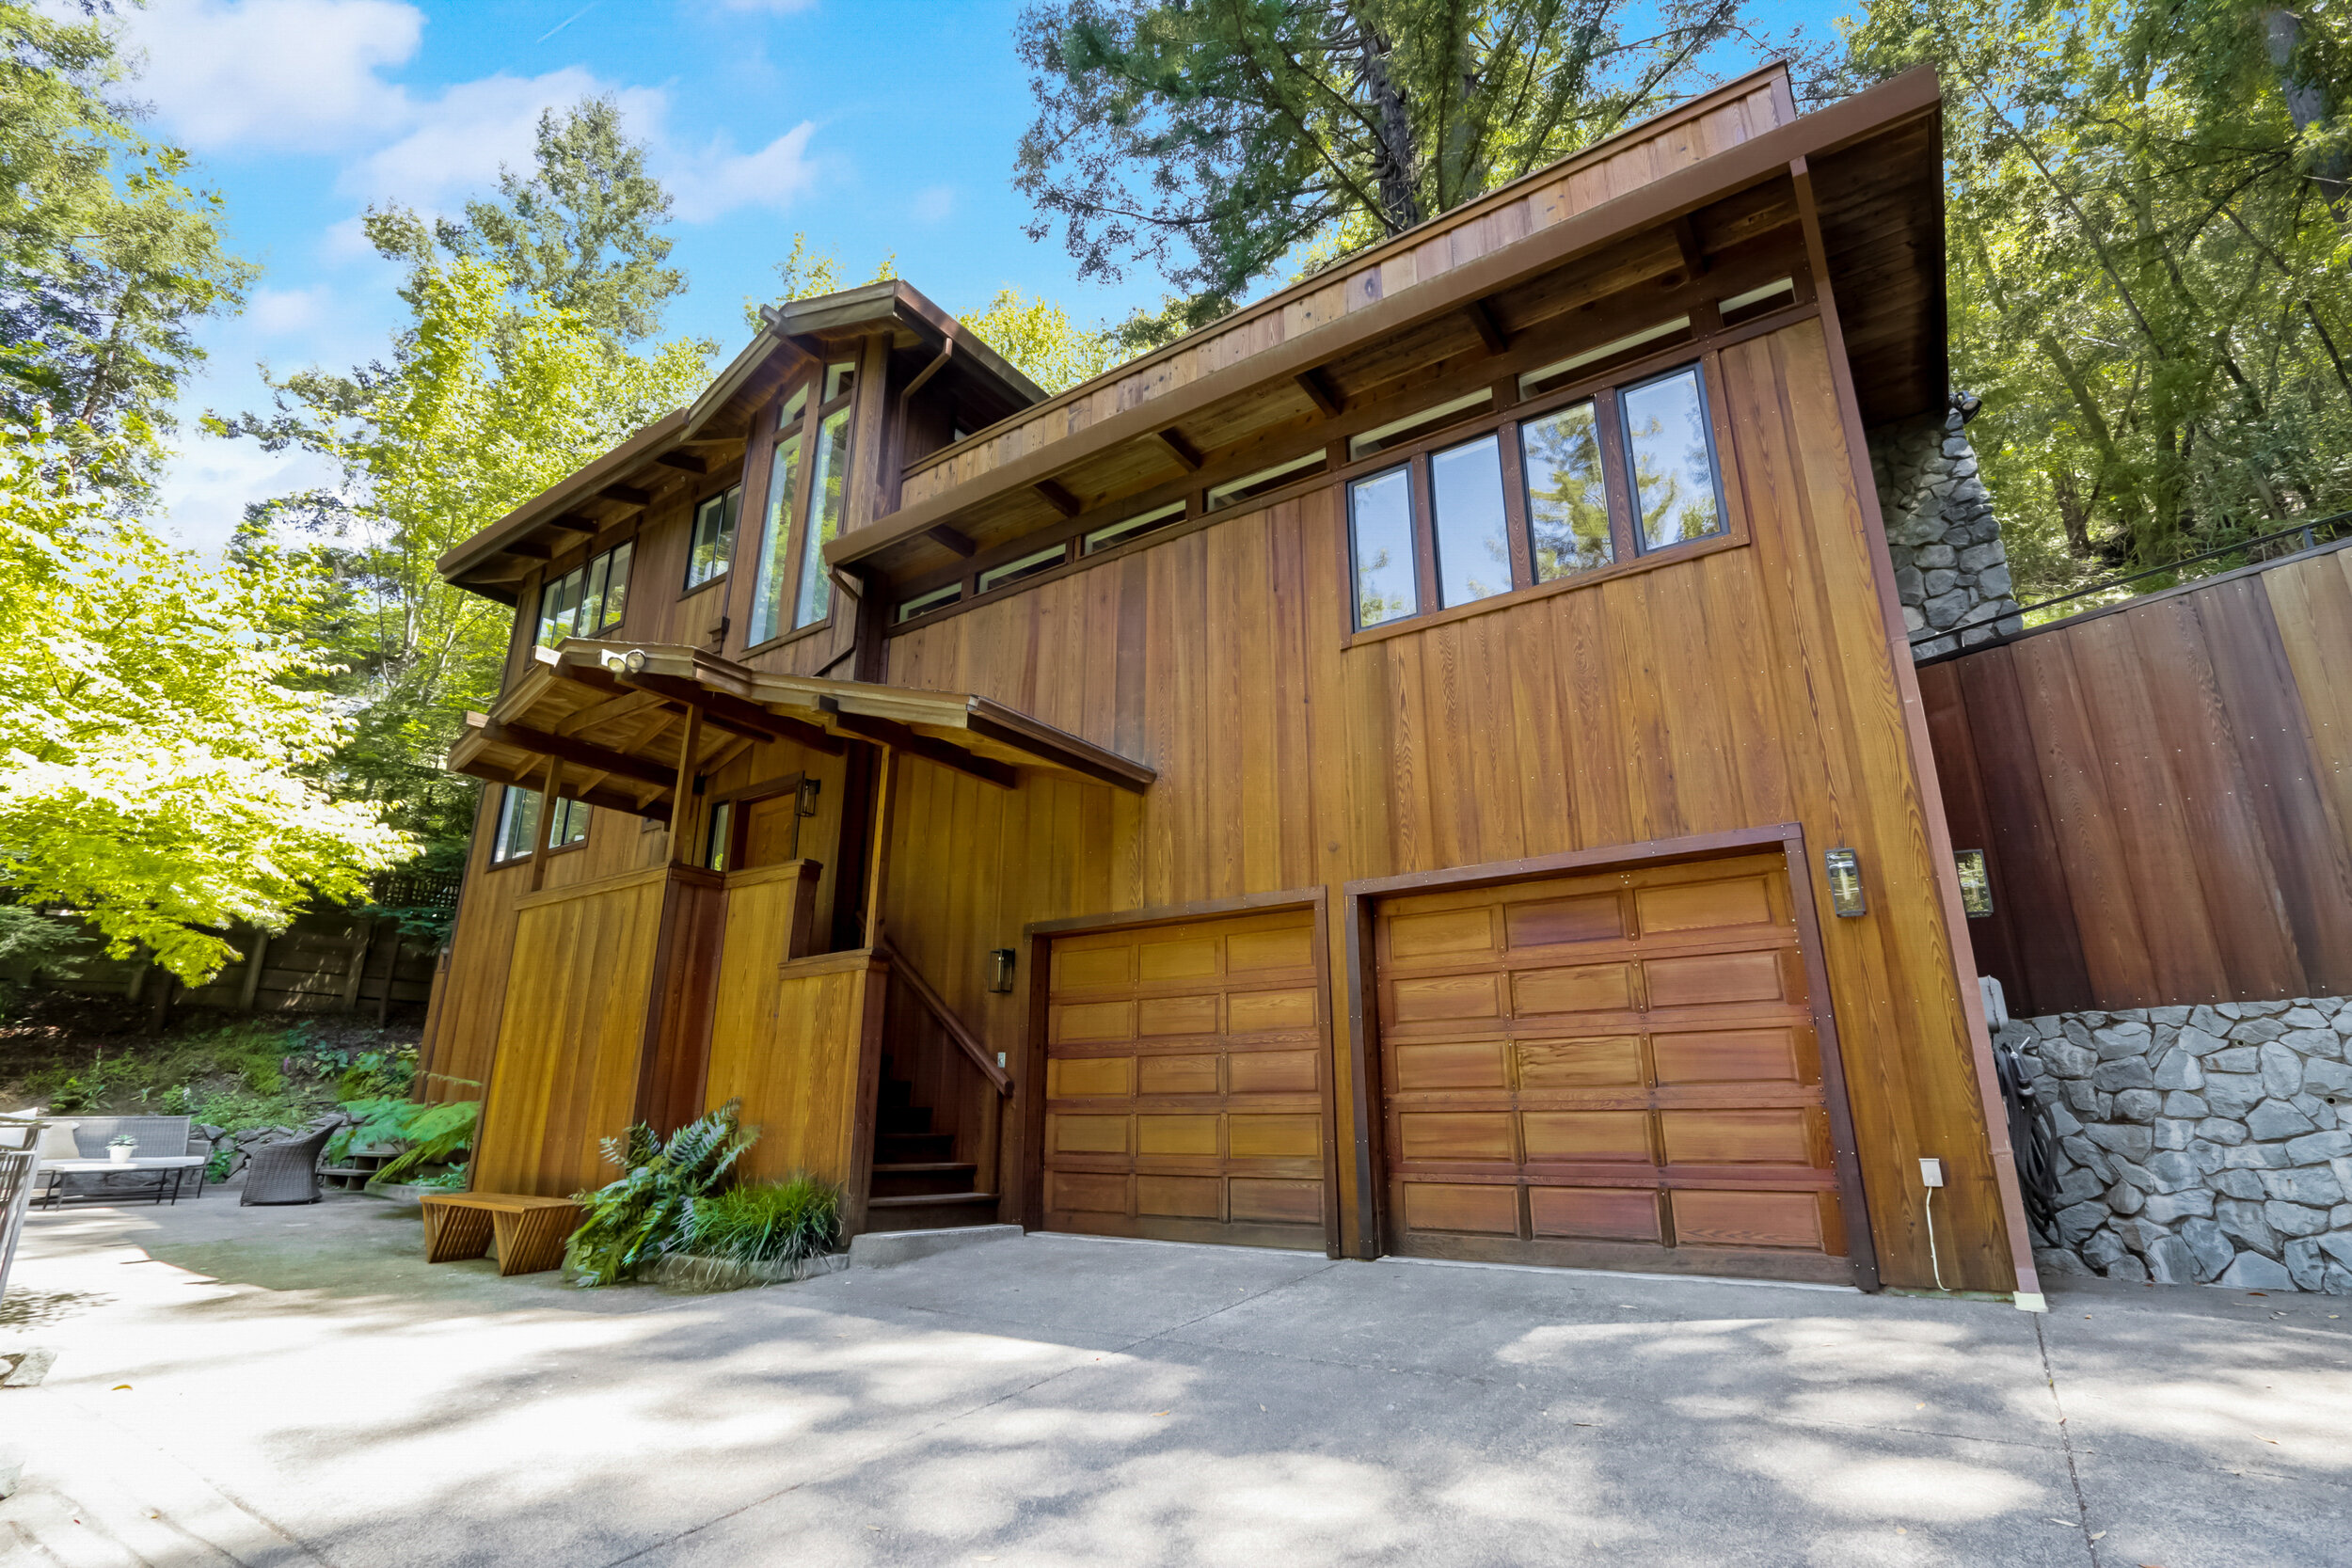 170 Spring Grove San Anselmo For Sale by Own Marin County Top Realtors-02.jpg